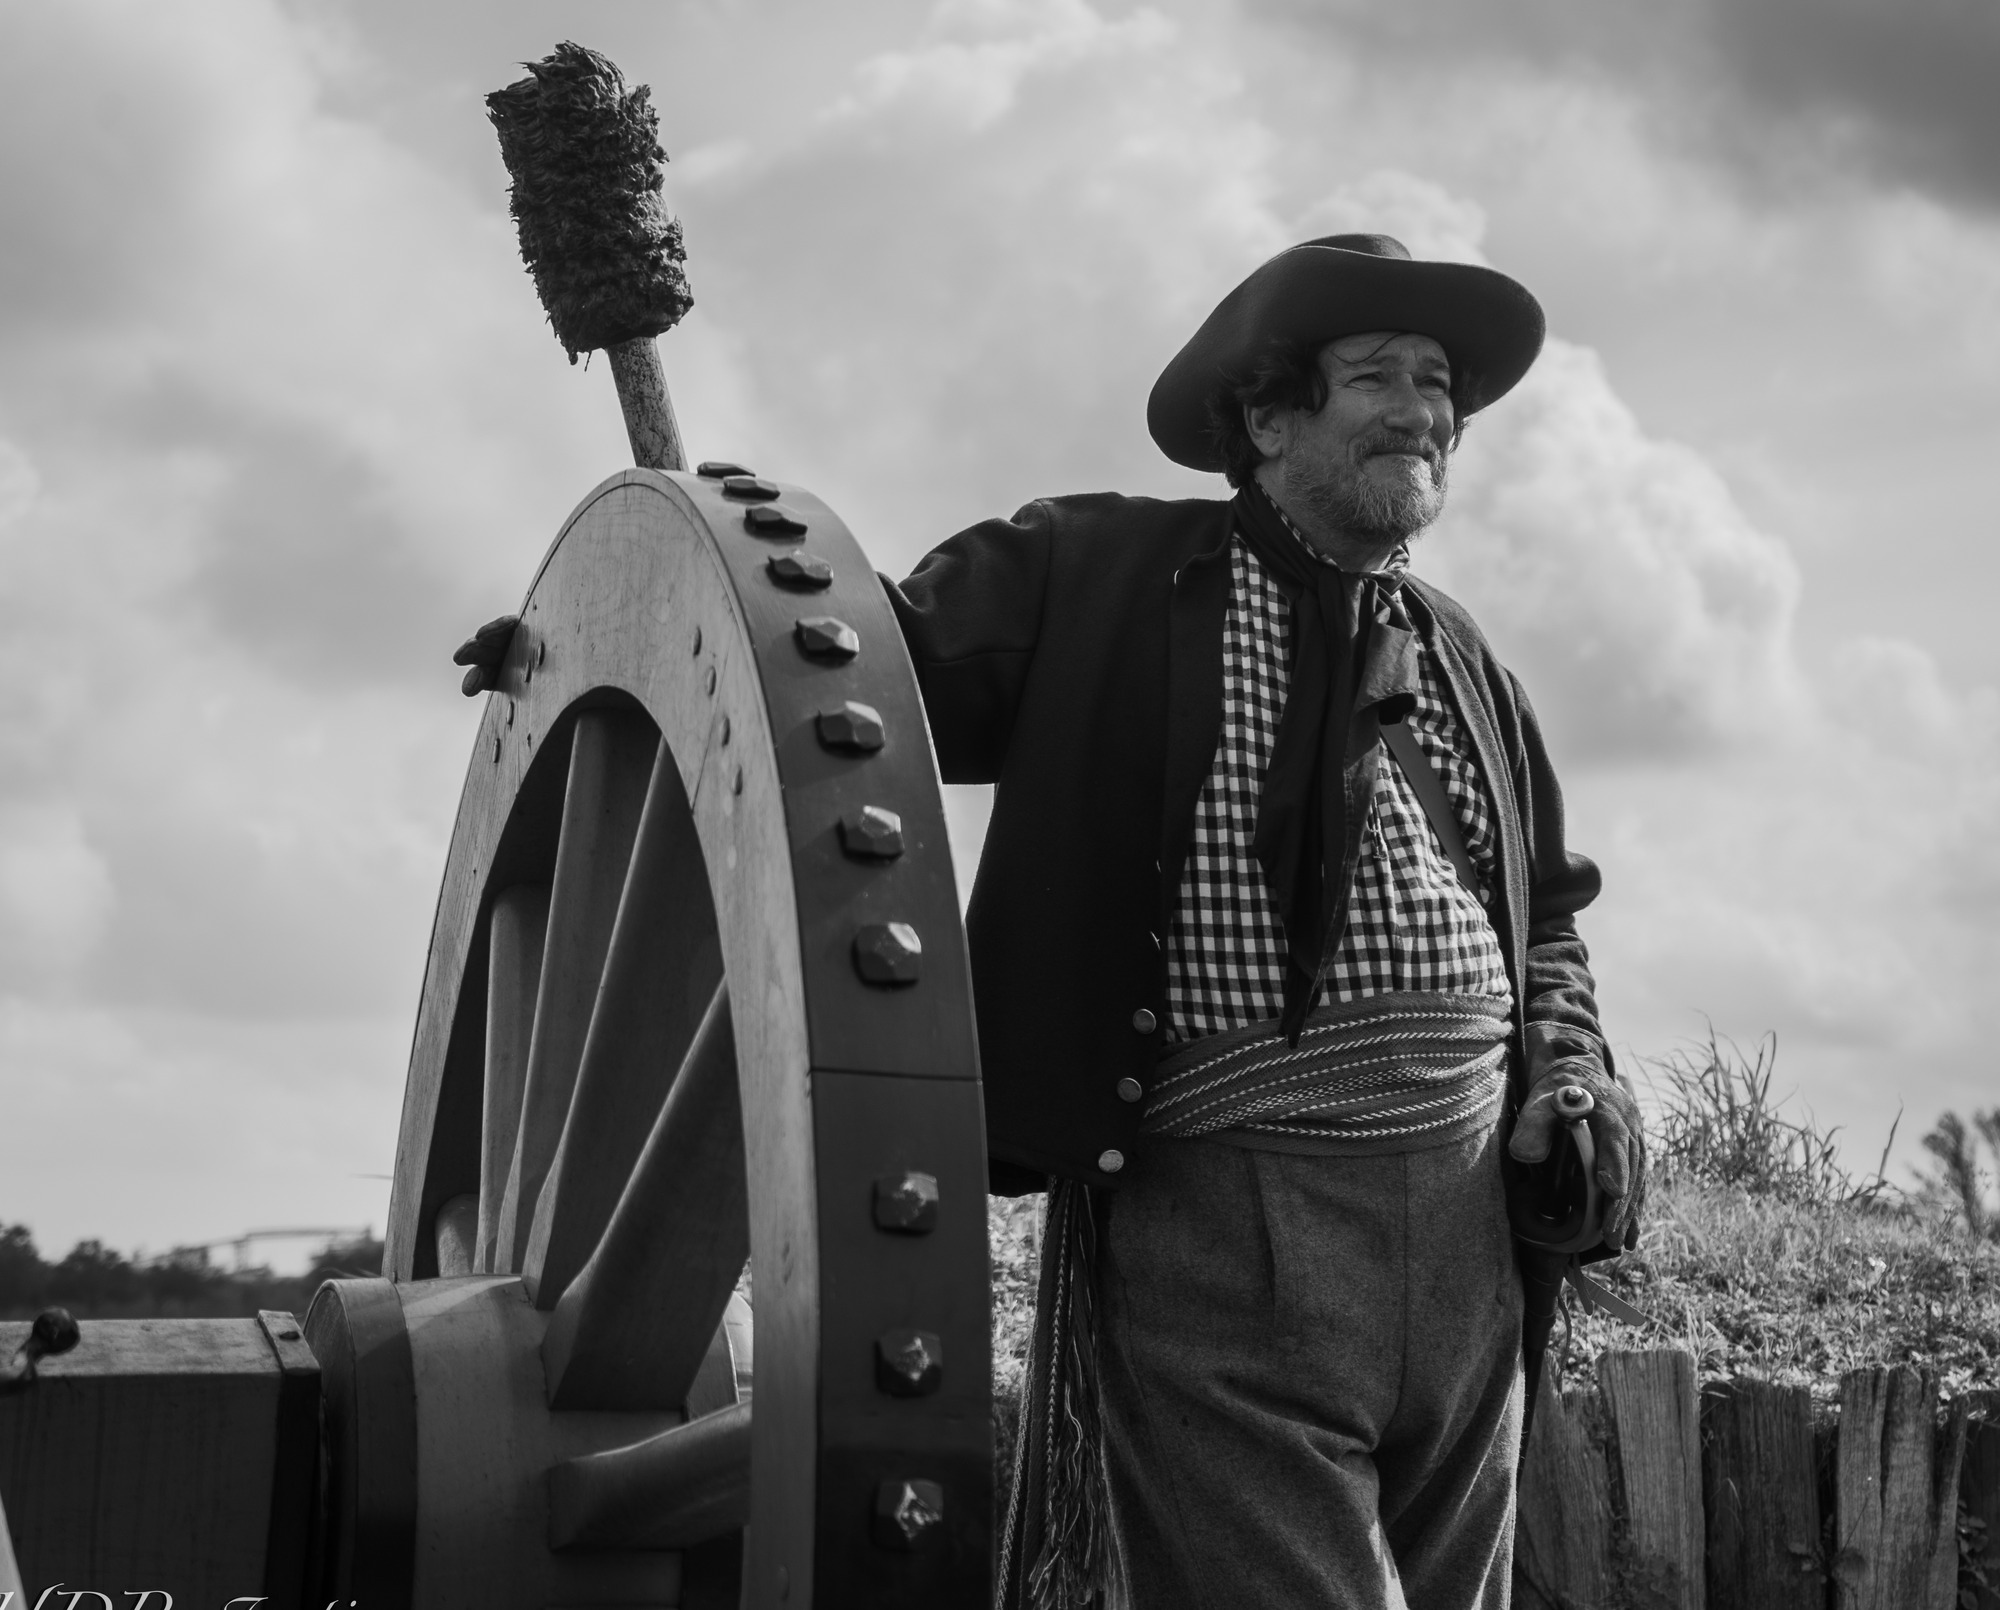 Black and white picture. Outside on a field. Man in period clothing stands next to a cannon wheel.